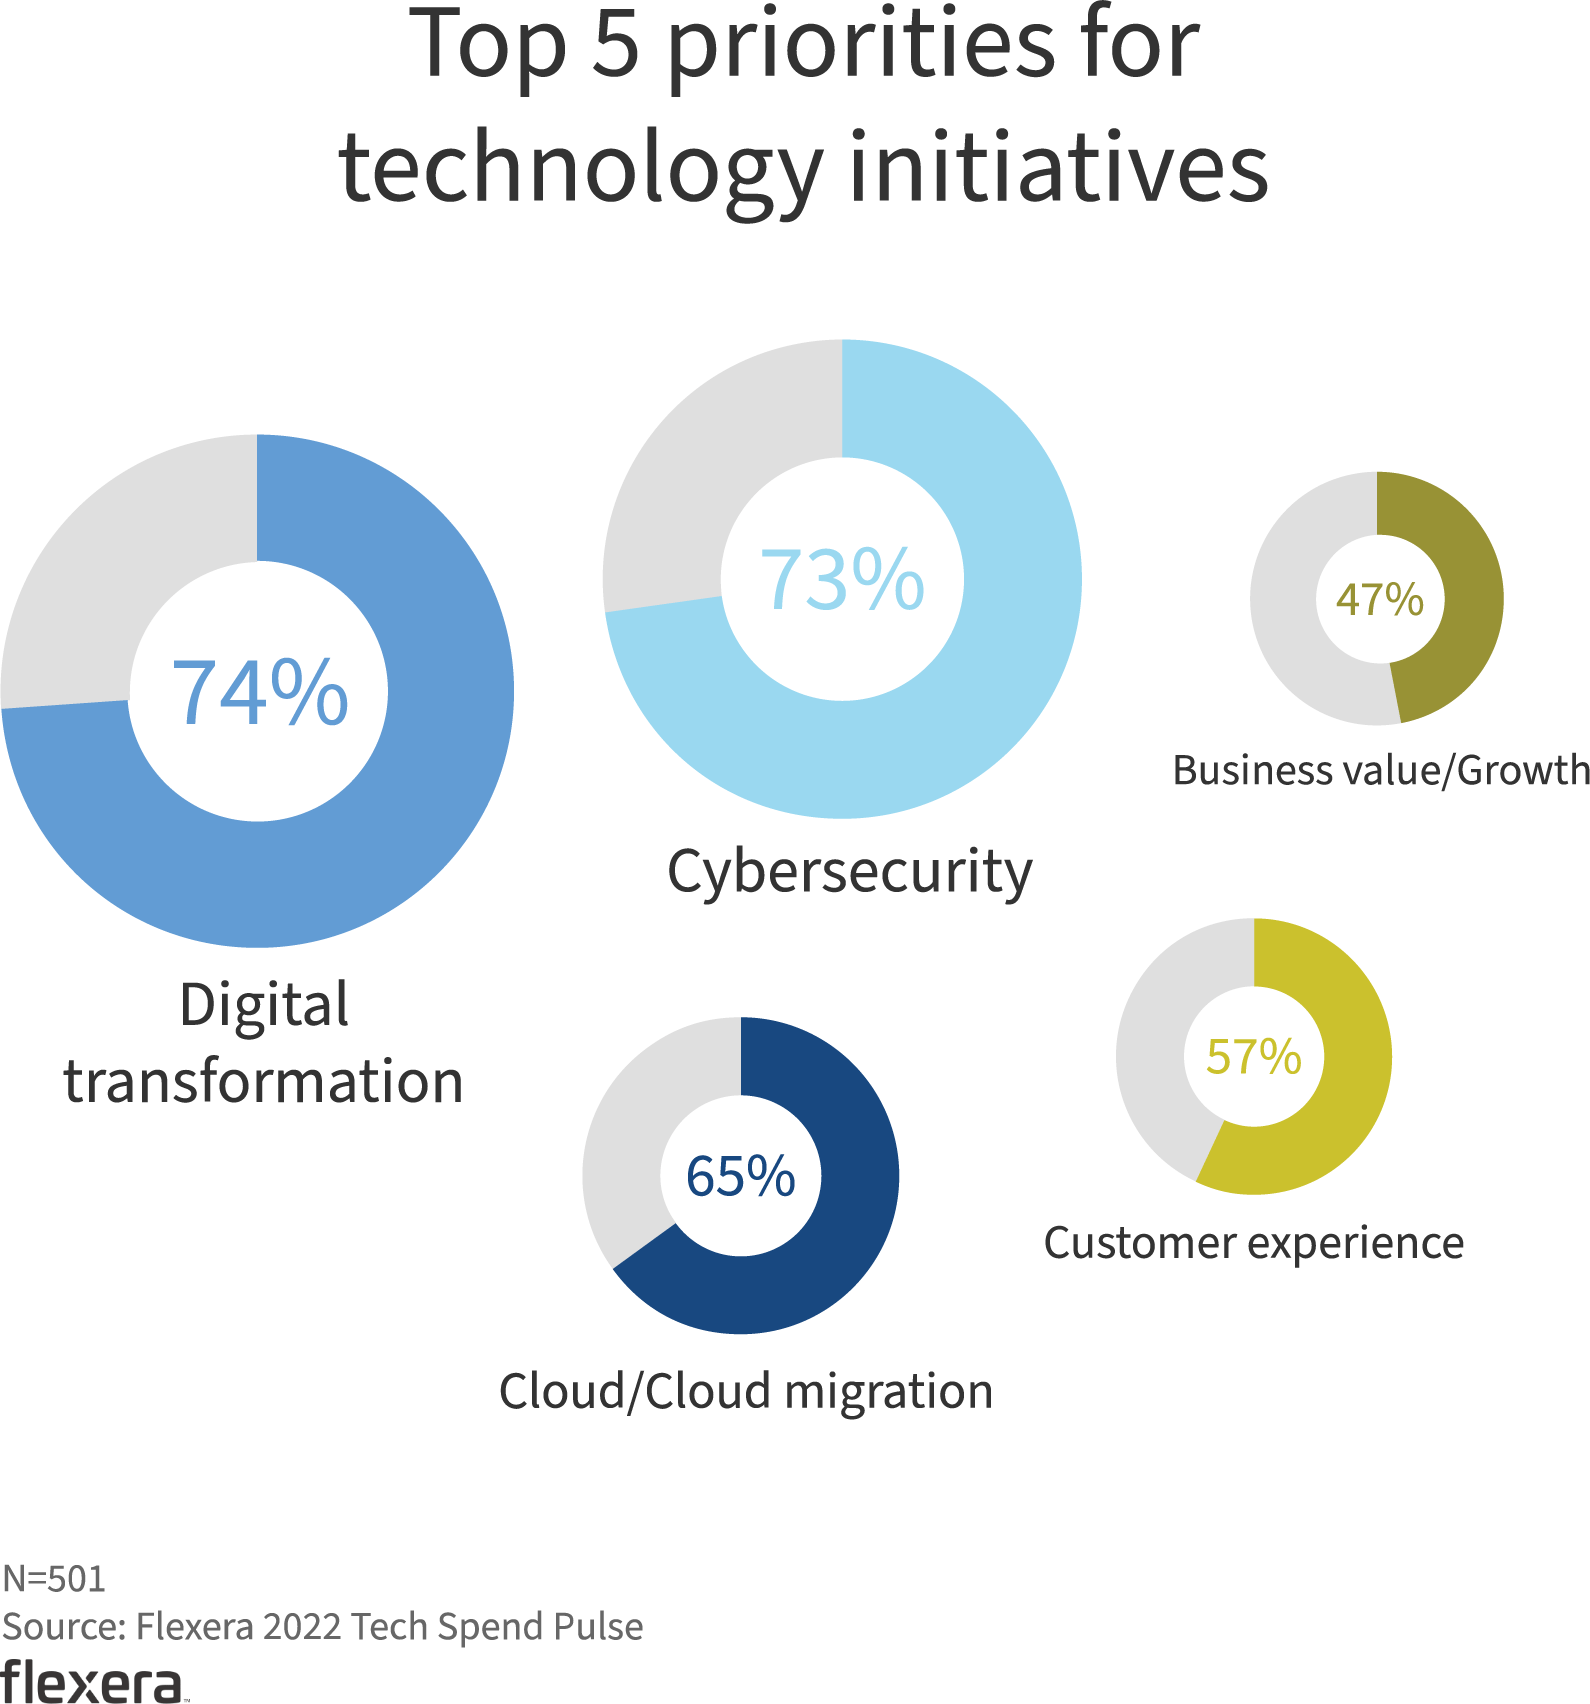 Top 5 priorities for technology initiatives